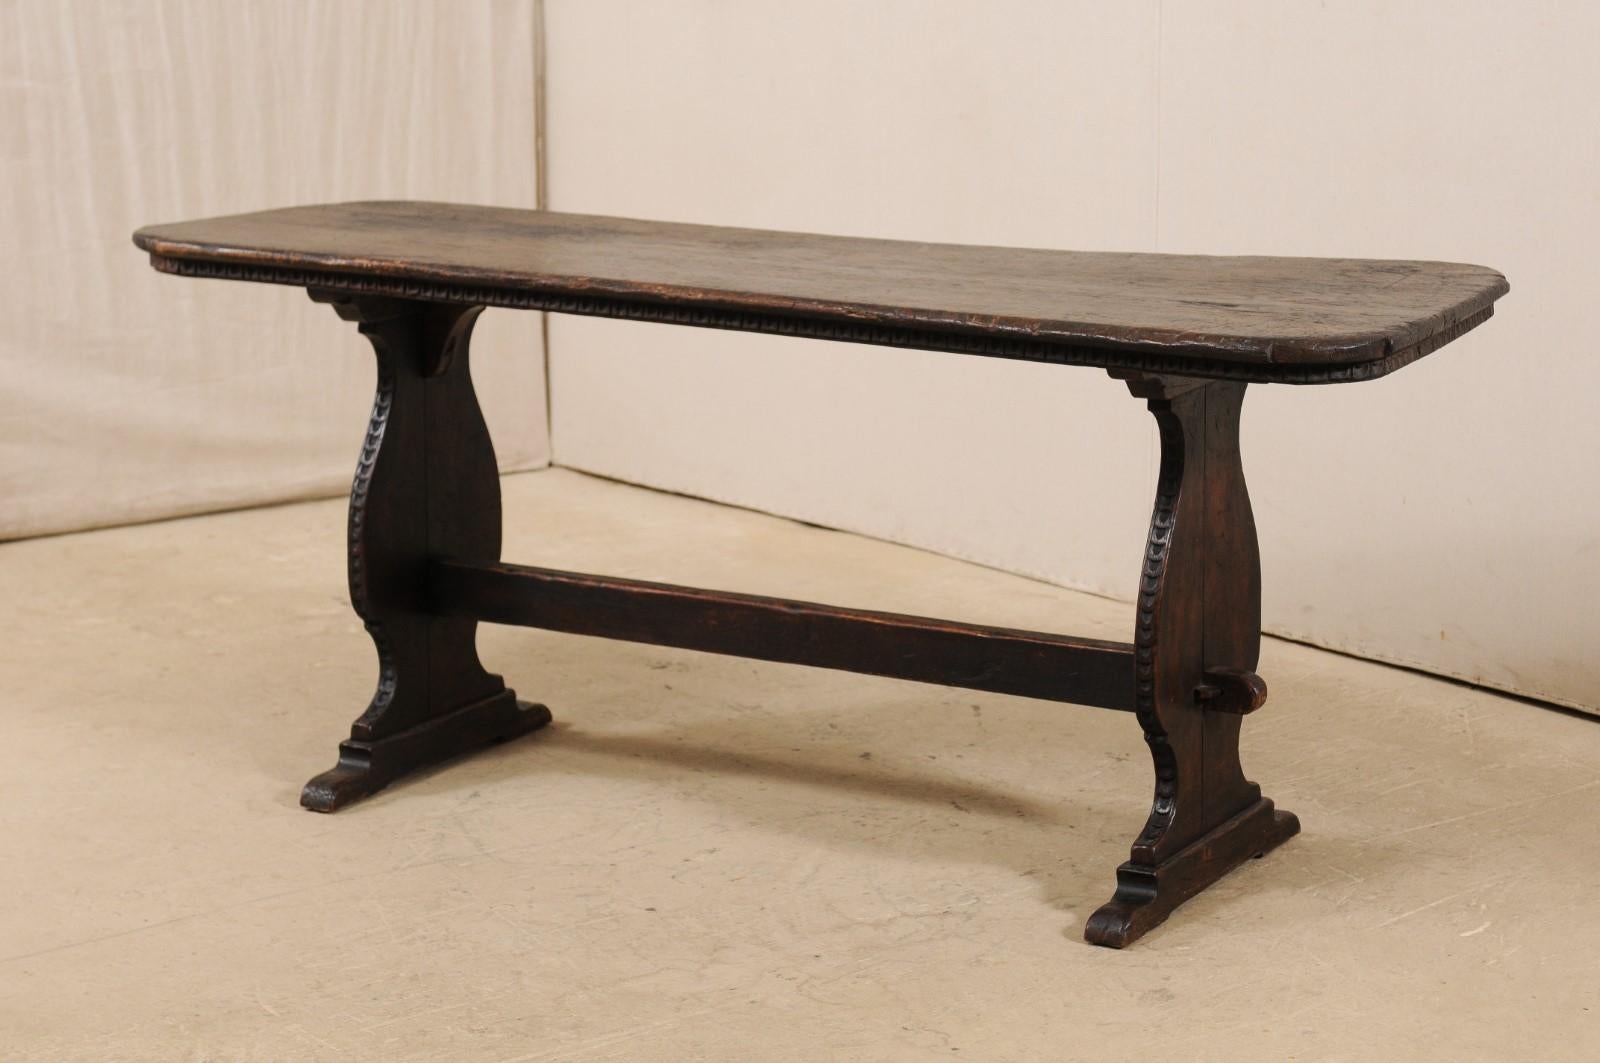 18th Century Handsome Antique Italian Console Desk with Nicely Carved Trestle Style Legs